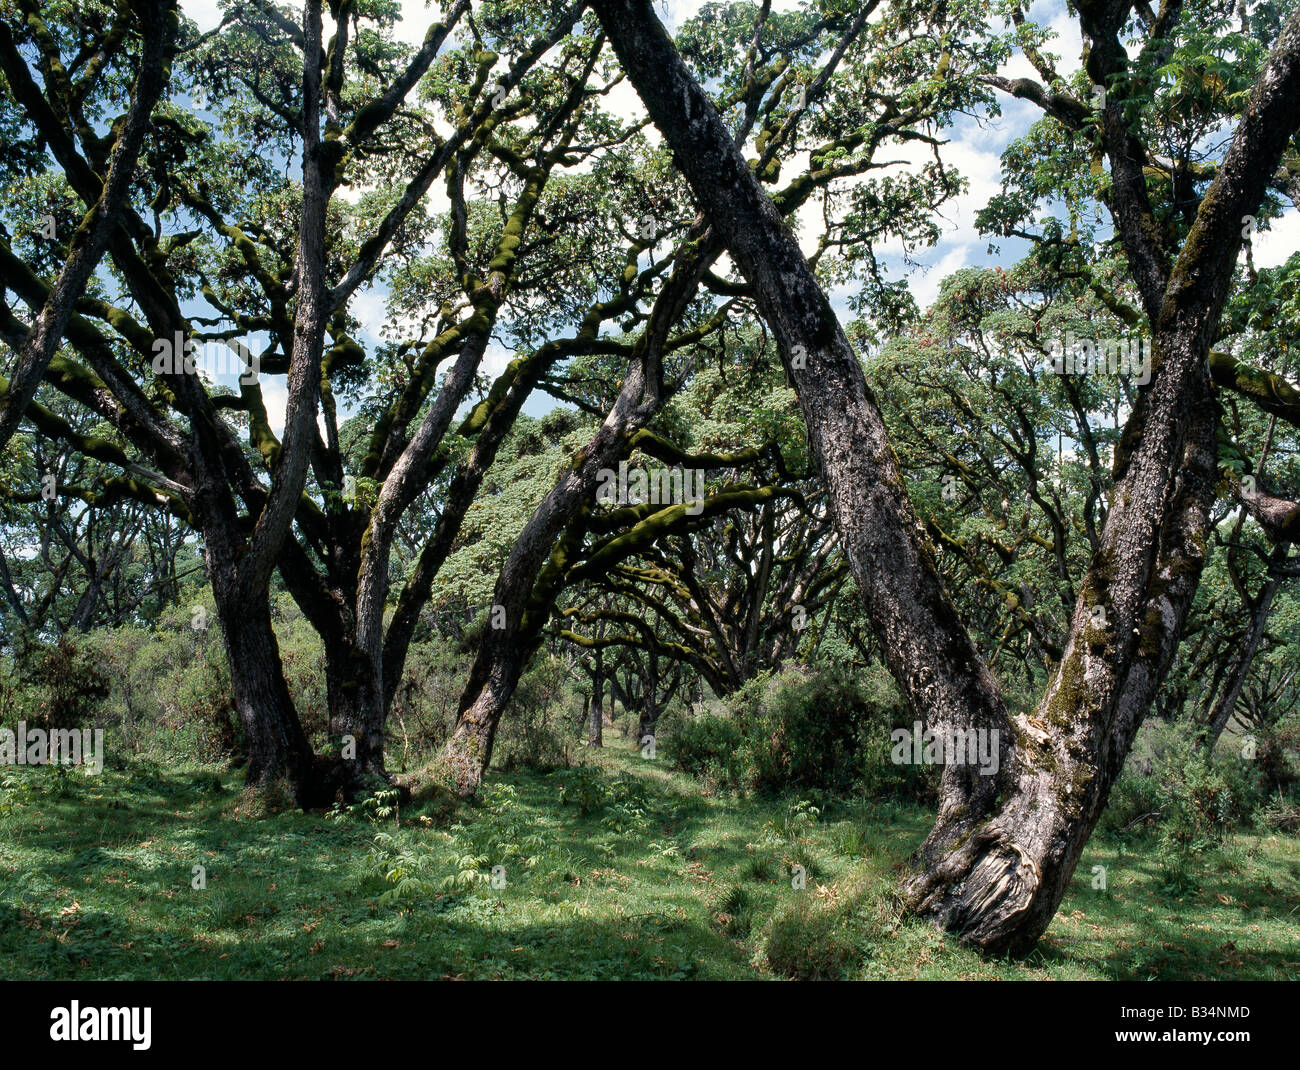 Kenya, Central Province, Aberdare National Park. A grove of Hagenia trees at 10,000 feet in the Aberdare National Park.. Stock Photo